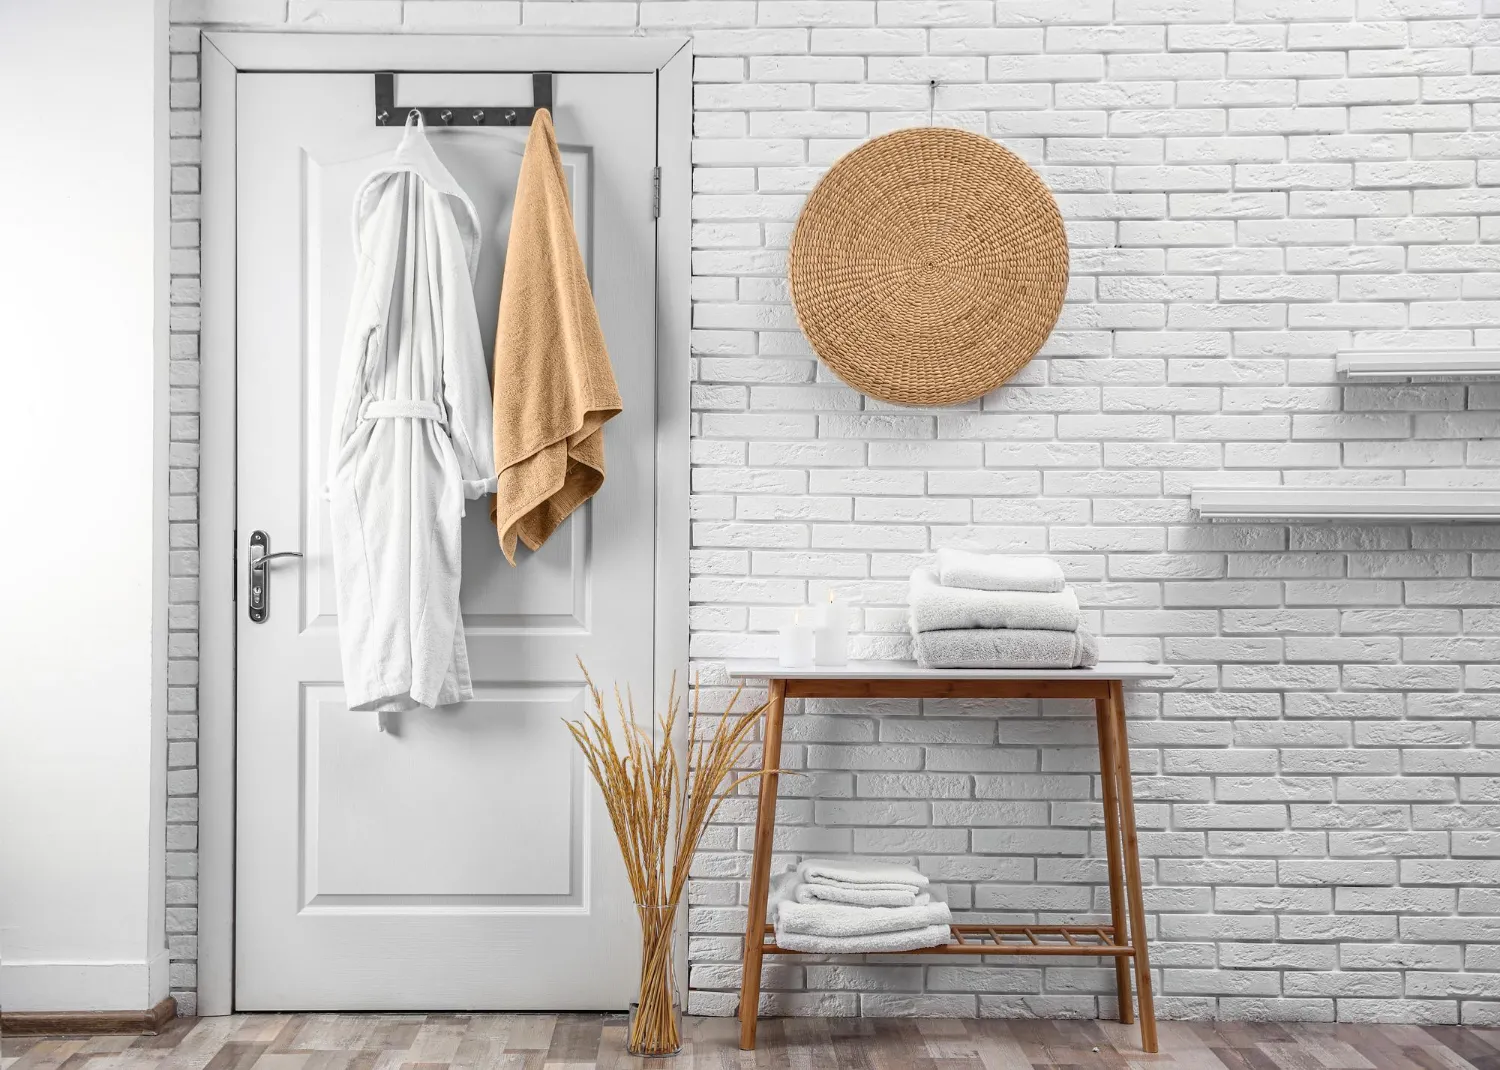 One trick you can try is to hide those bulky towels behind the door that will help you